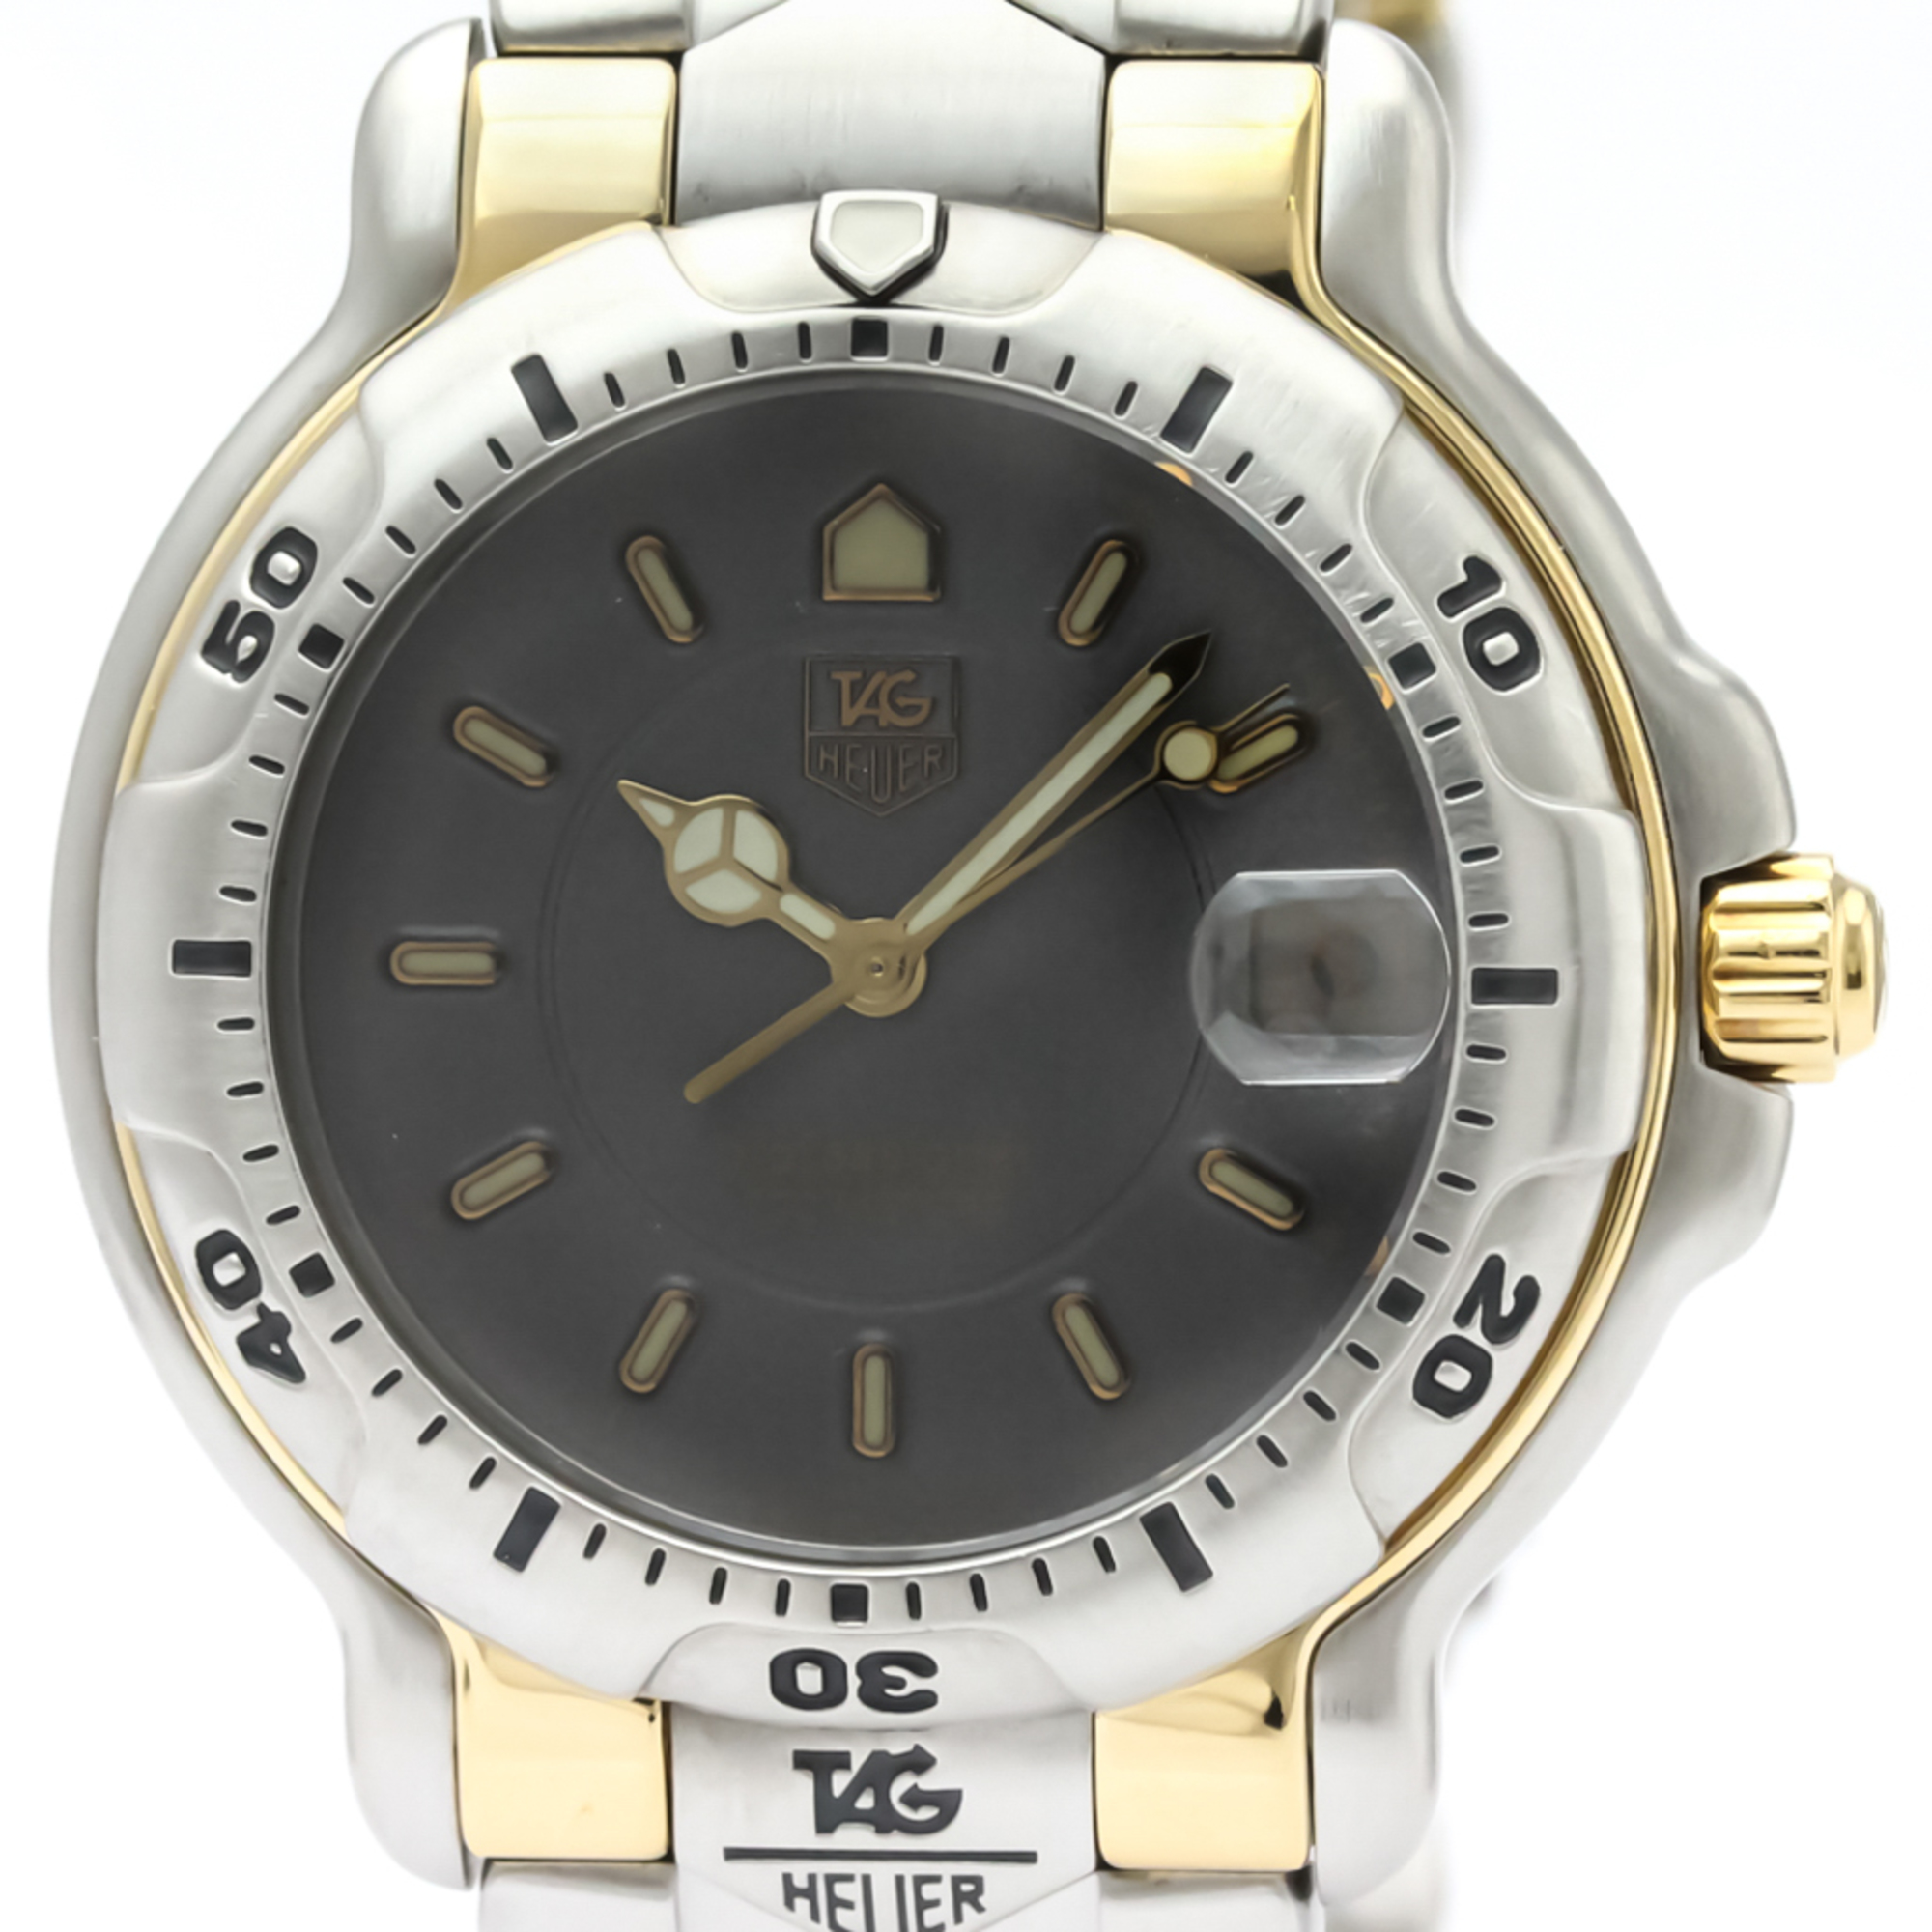 Tag Heuer 6000 Series Quartz Stainless Steel,Yellow Gold (18K) Men's Sports Watch WH1152